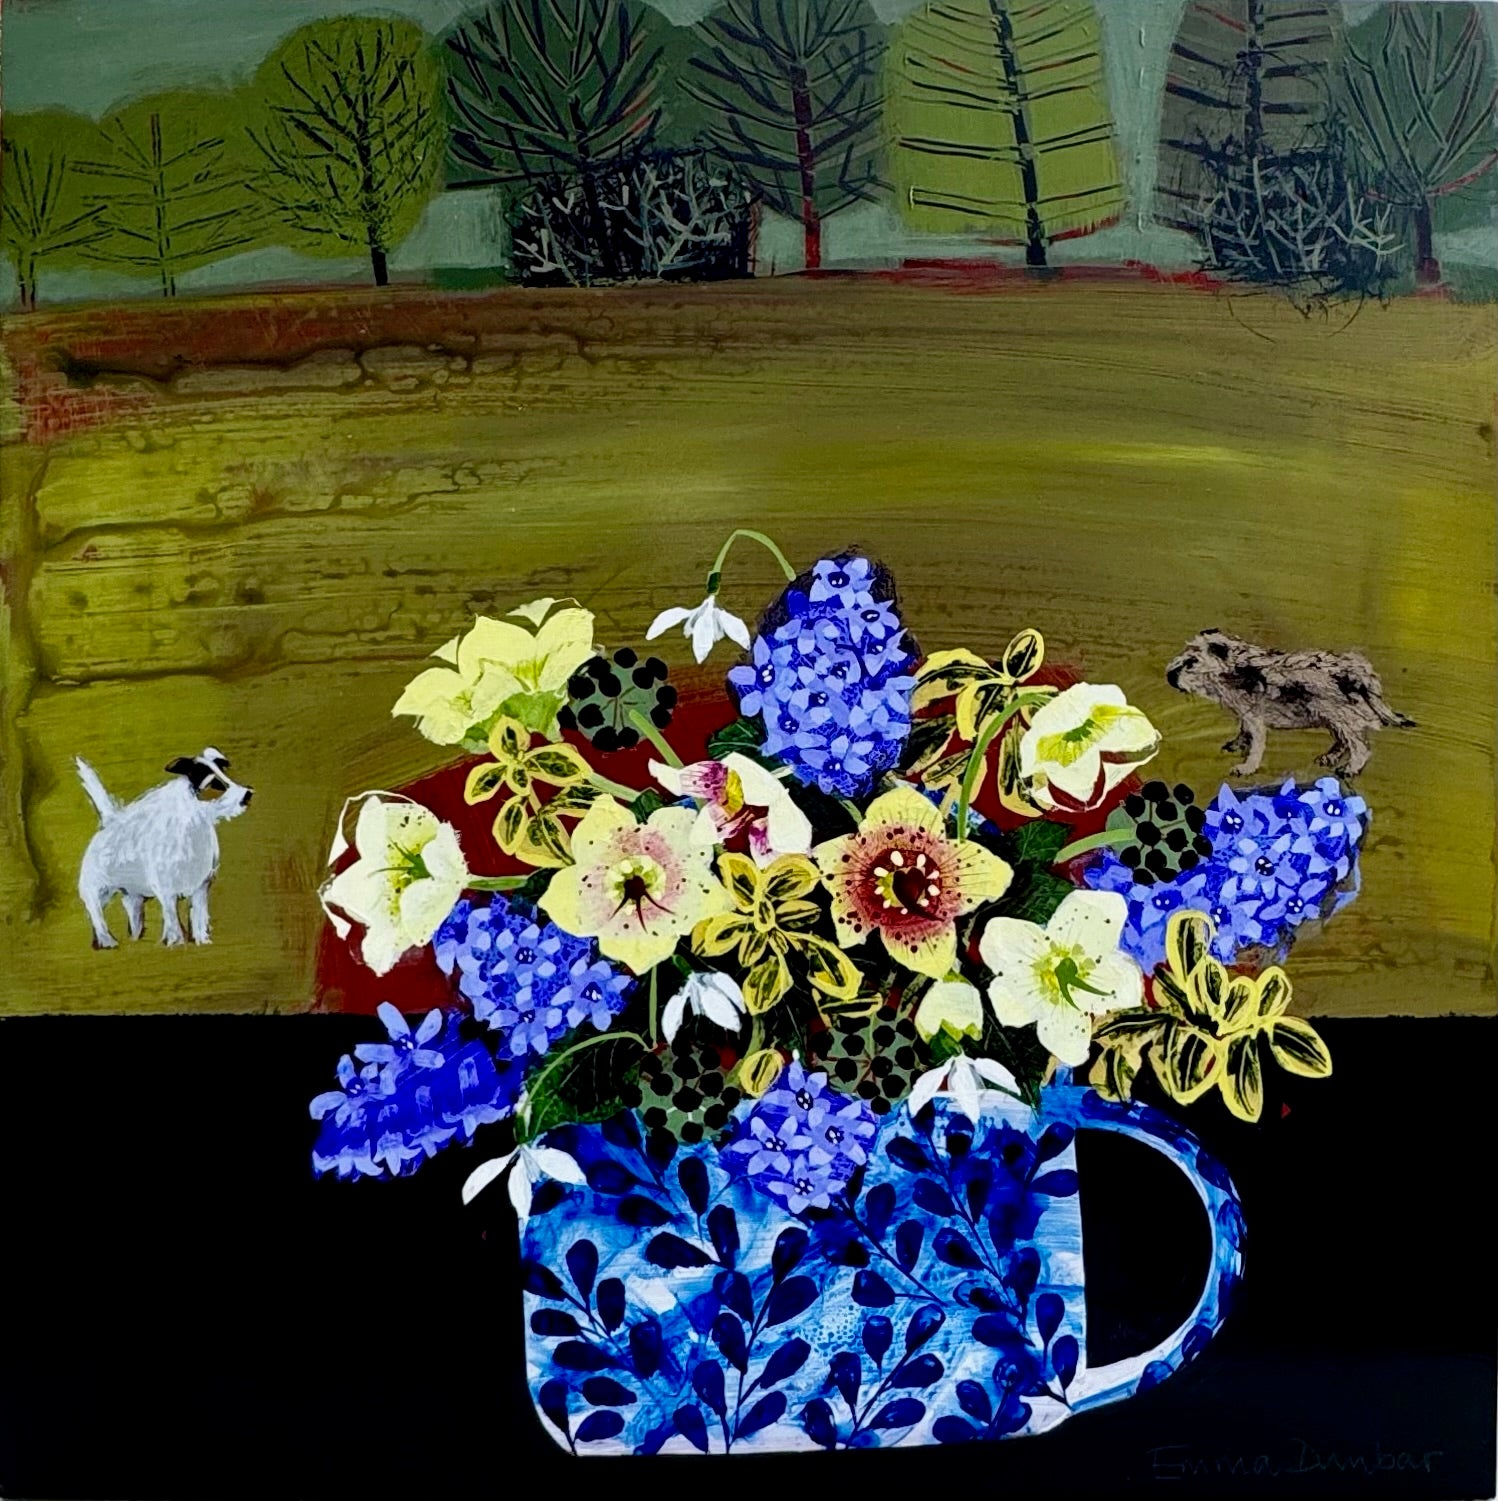 'Two Friends behind hellebores and hyacinths' by Emma Dunbar available at Padstow Gallery, Cornwall